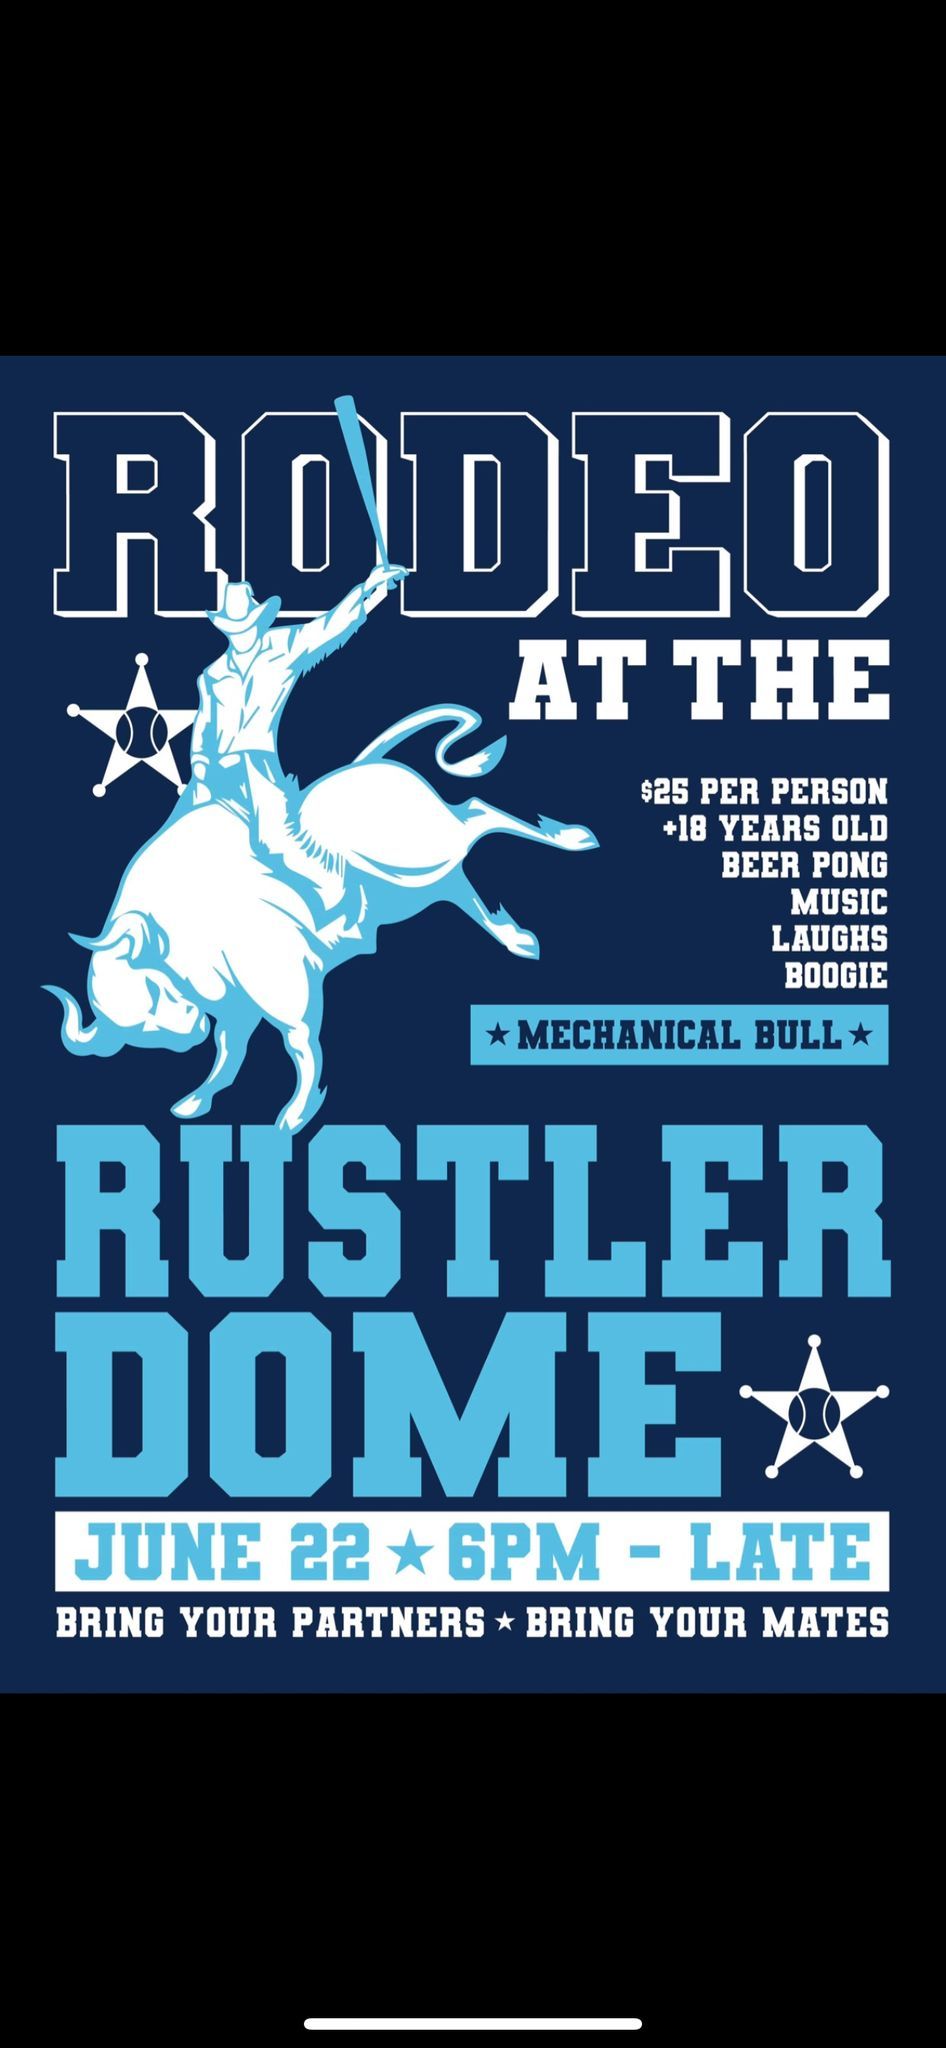 Rodeo at the Rustler Dome